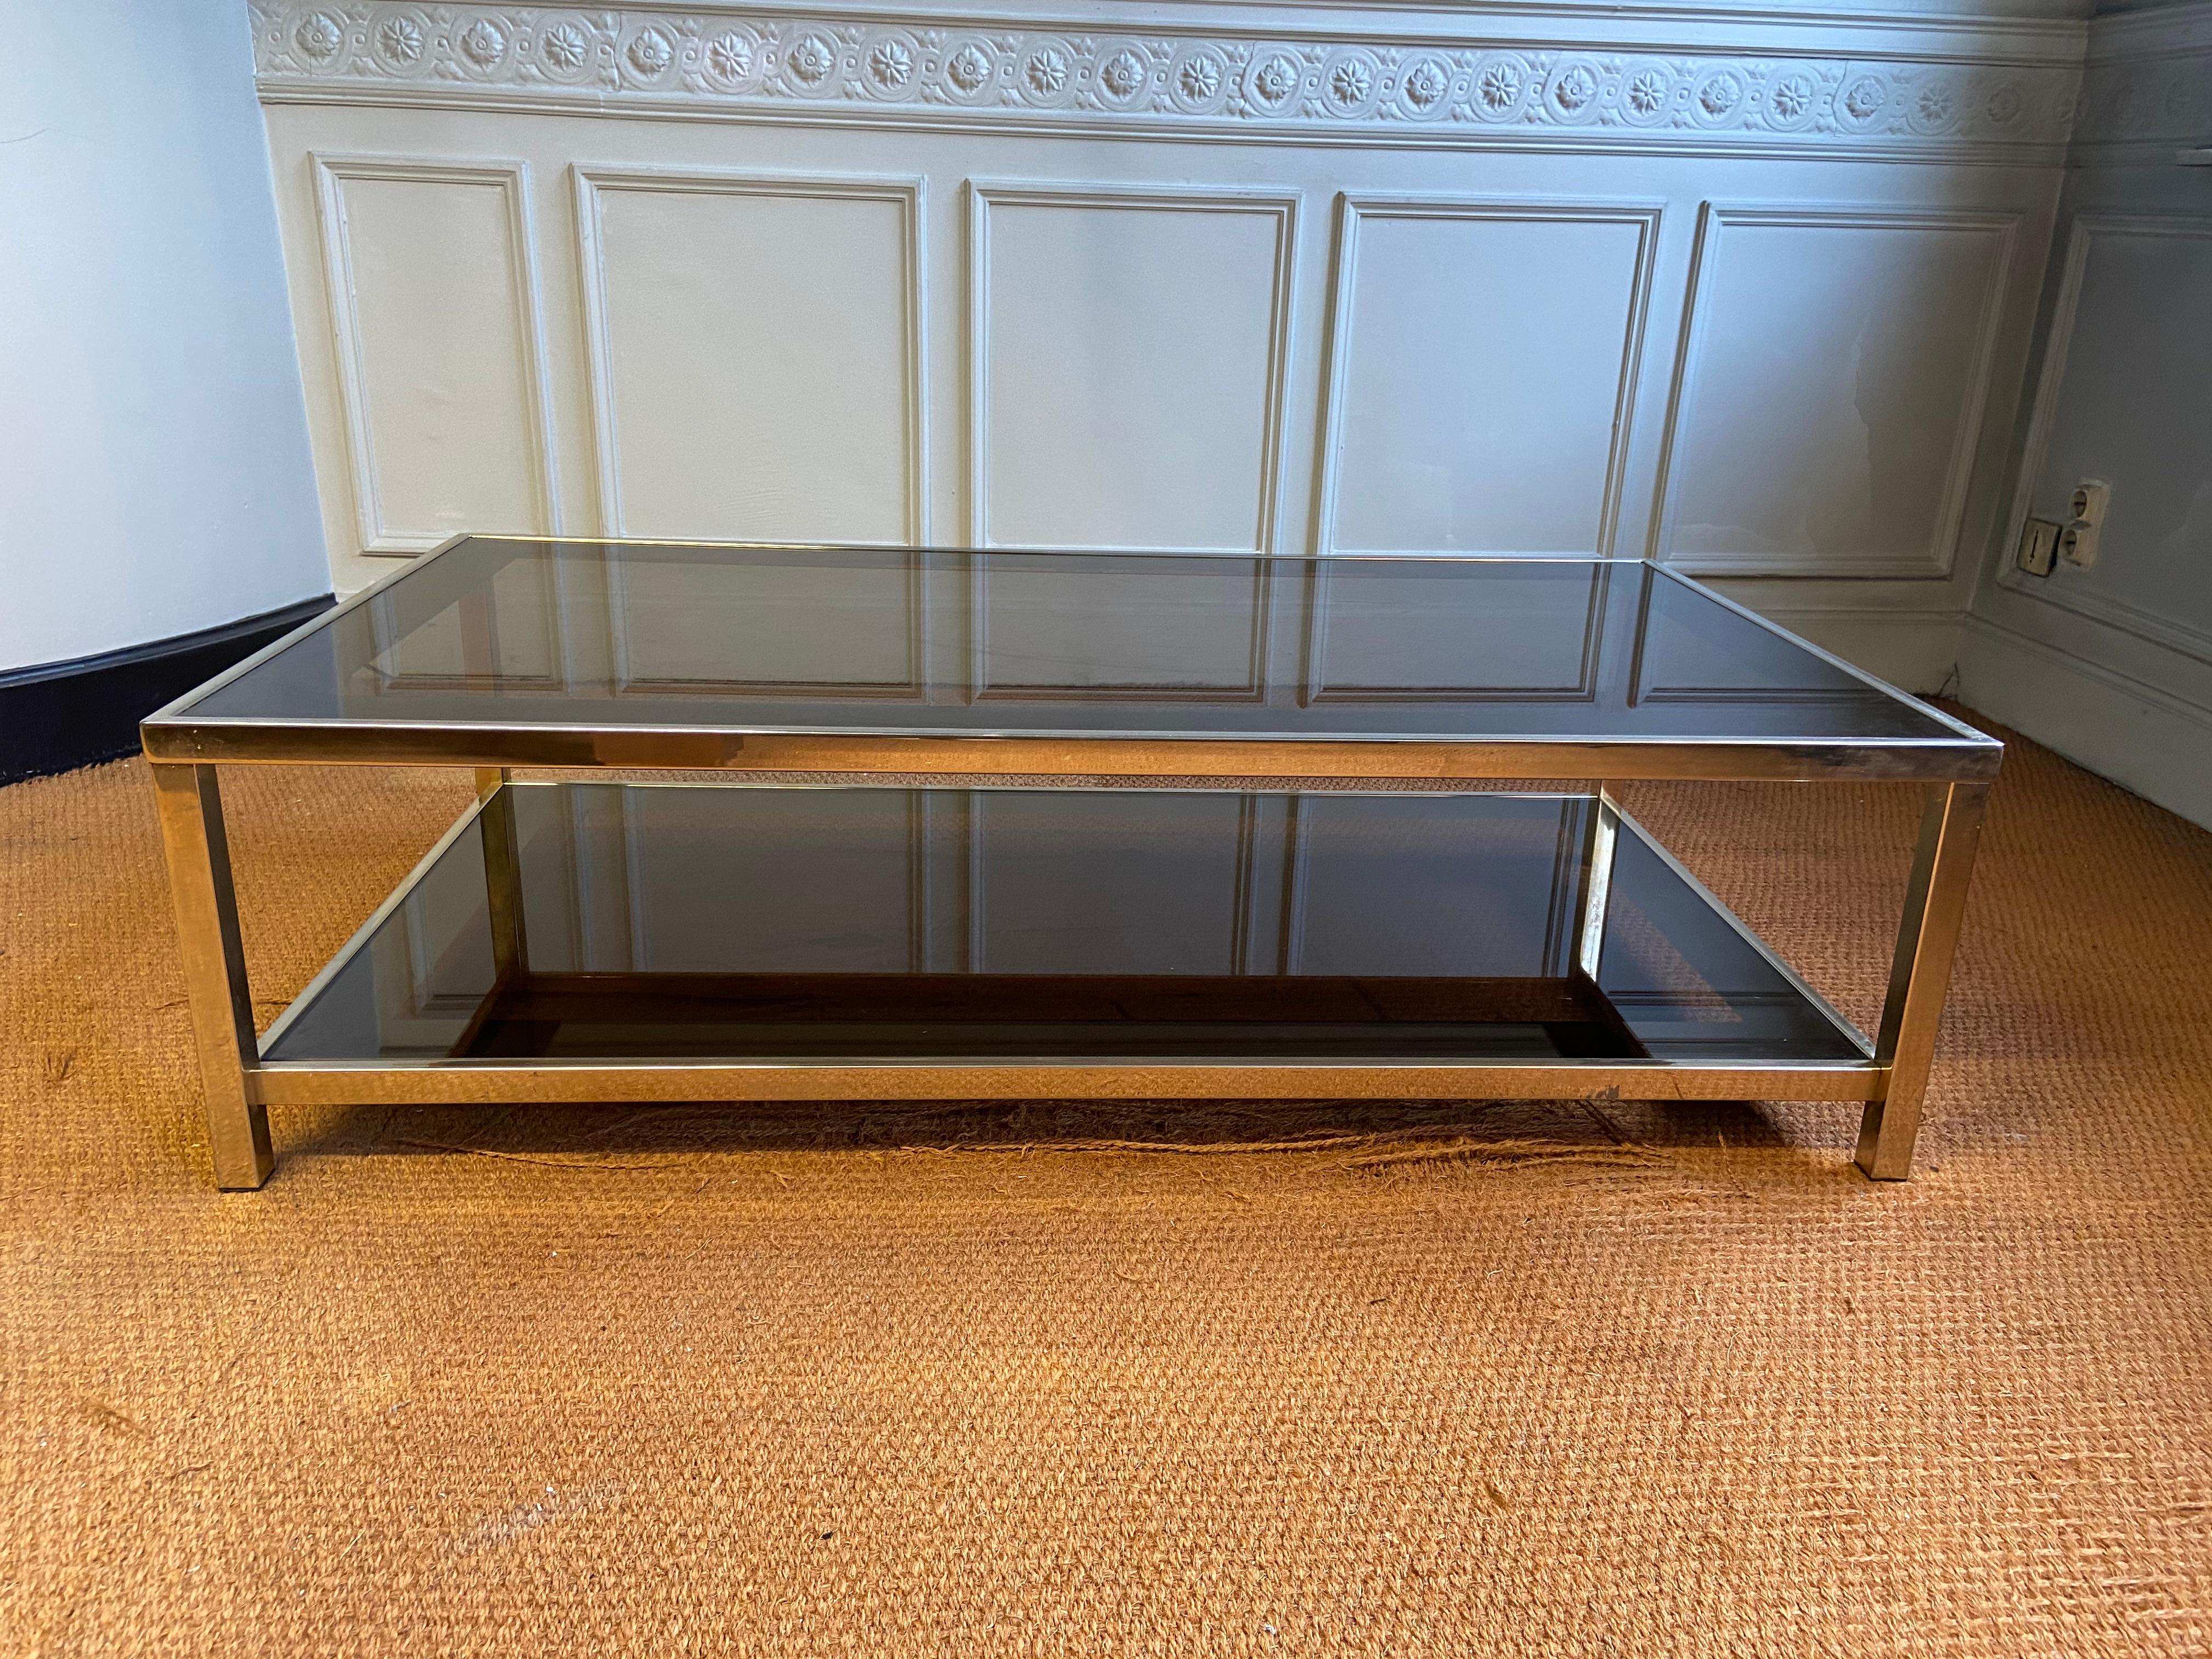 Coffee table produced by belgo chrom in belgium in the 70s. Structure in metal gilded with fine 23 carat gold. Two smoked glass tops with bronze mirror edges. Used condition consistent with the age of the piece.